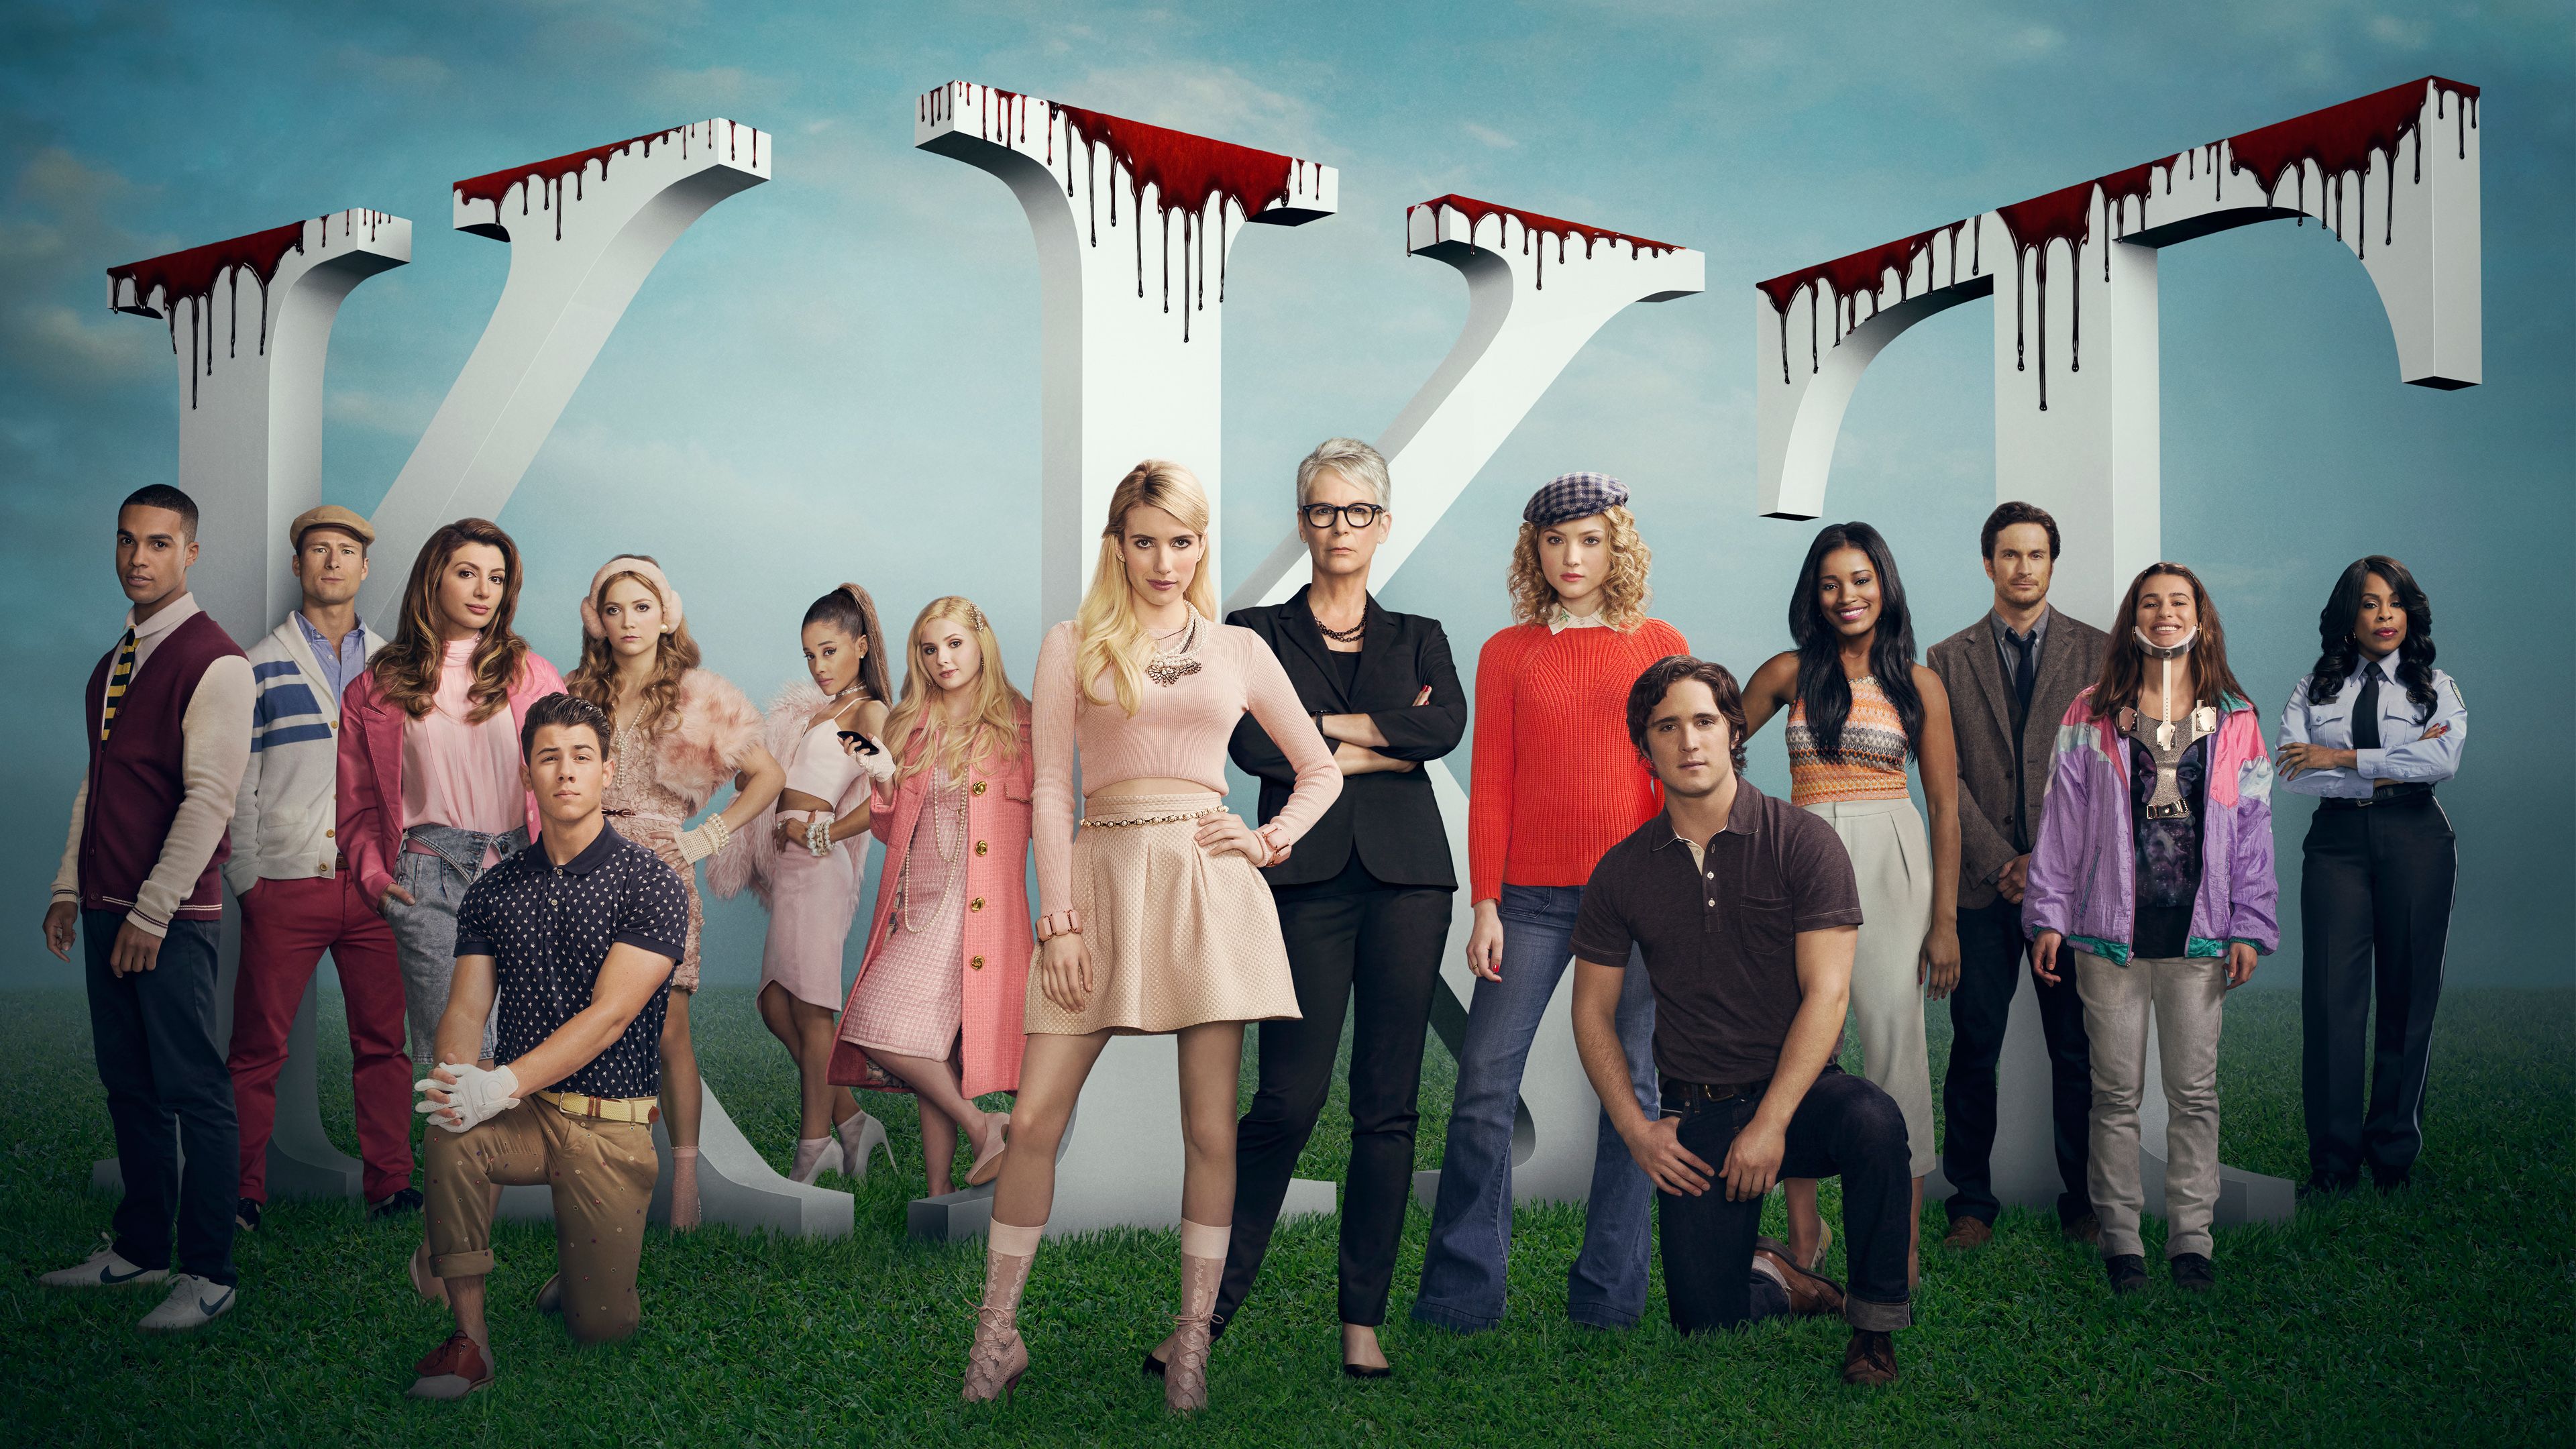 Scream Queens Wallpapers Wallpaper Cave Images, Photos, Reviews